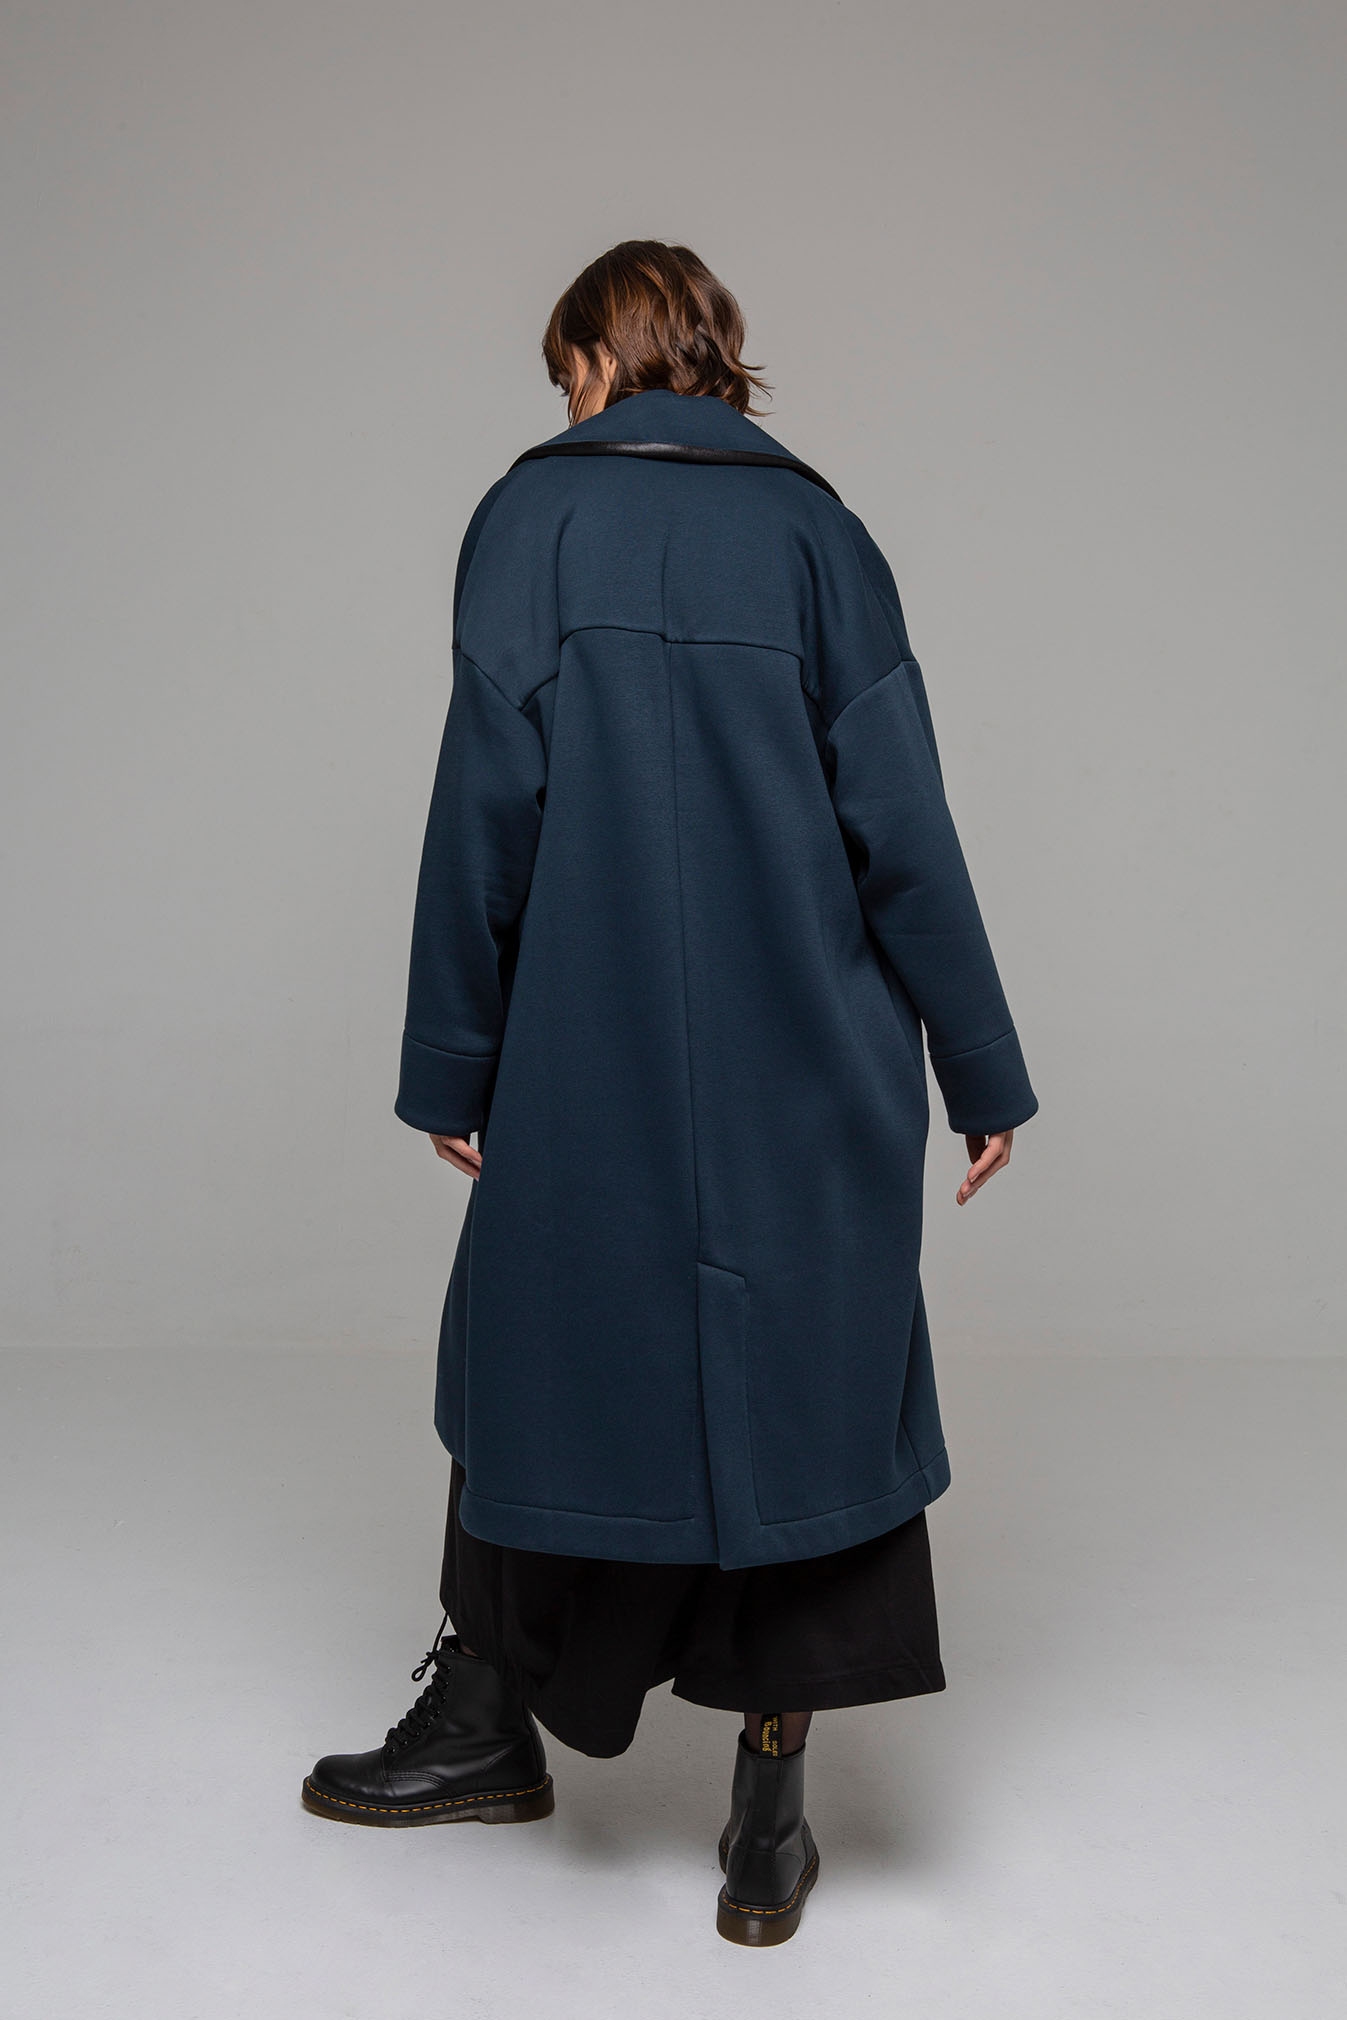 Women's Jersey Coat by Noble Athens